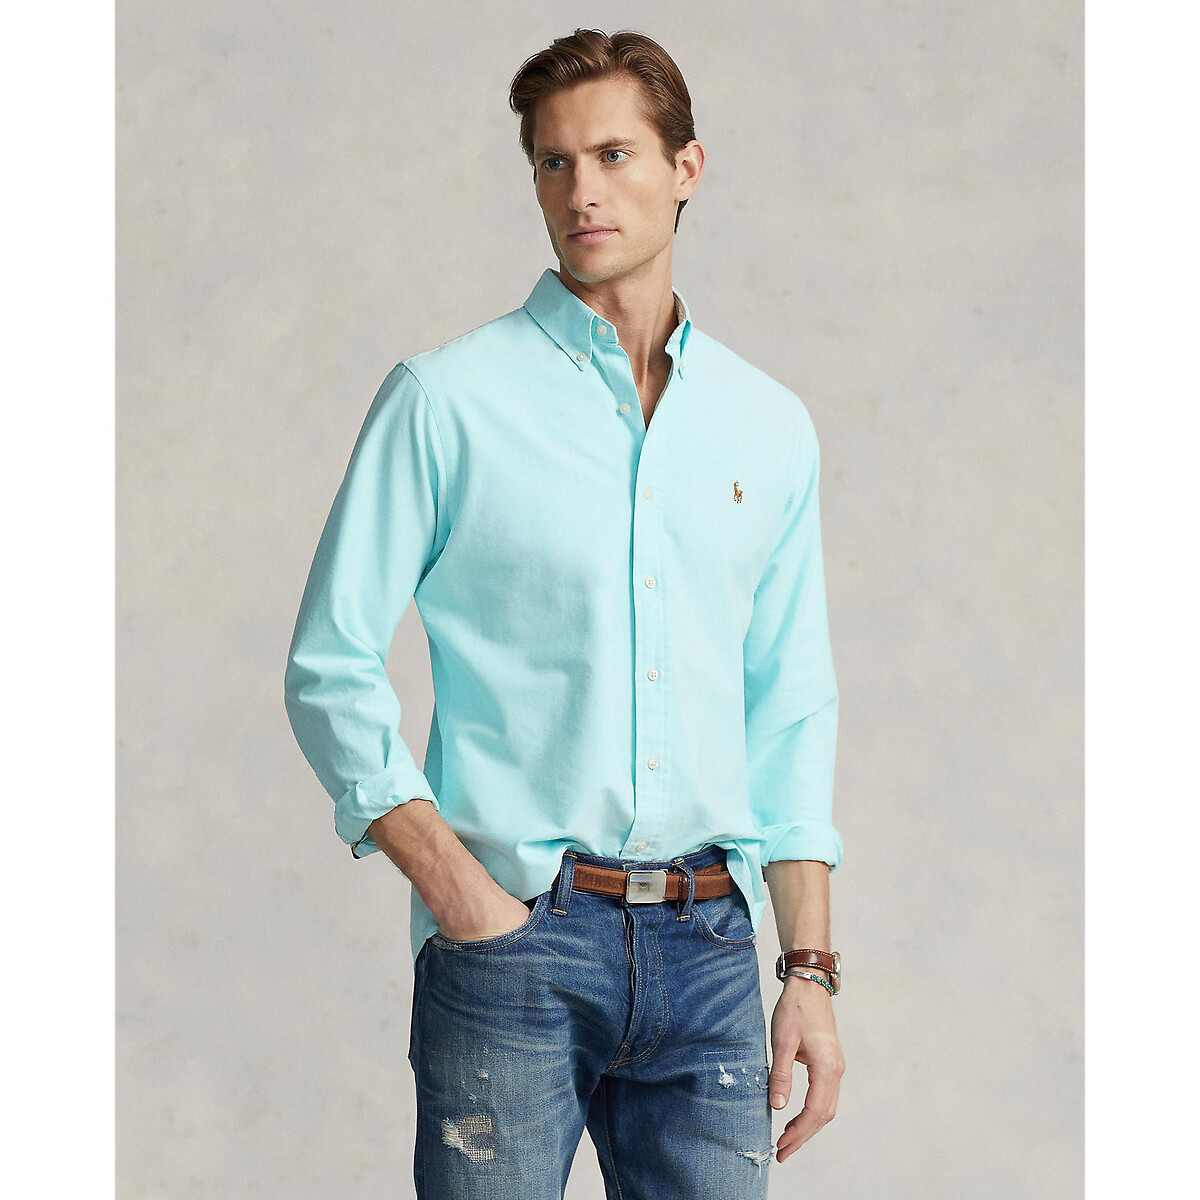 Image of Cotton Oxford Shirt in Regular Fit